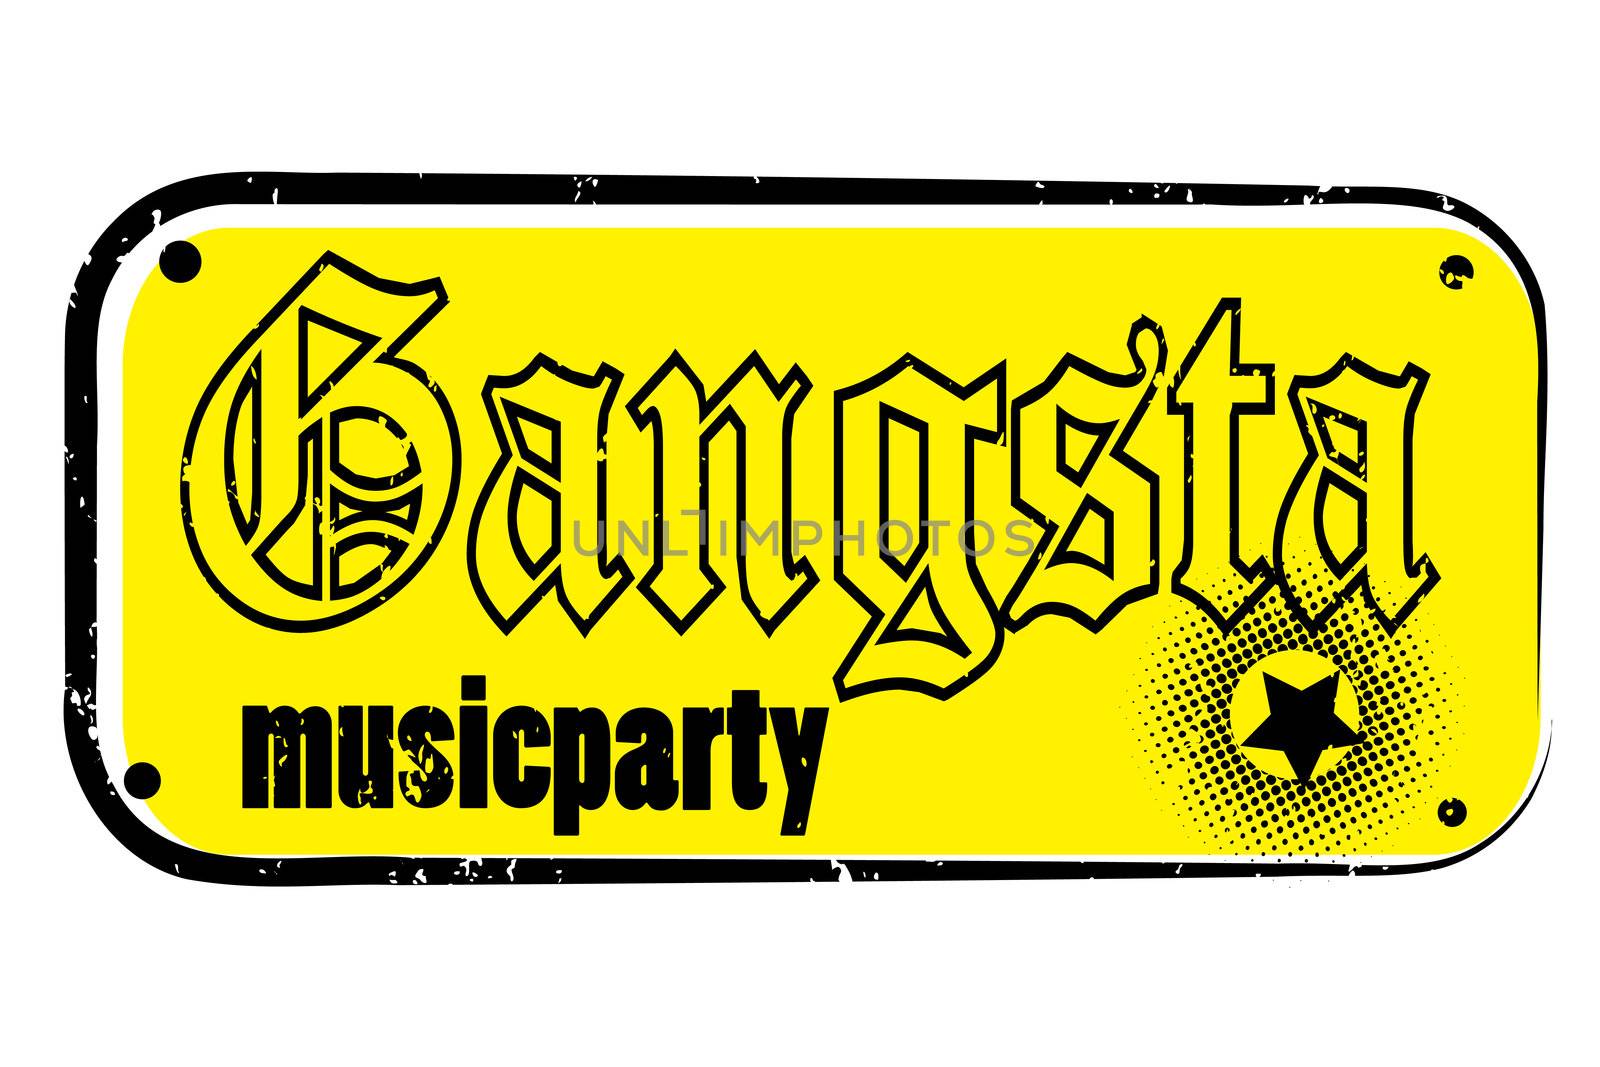 retro party music stamp for a night club or bar, gangsta seal with pop design